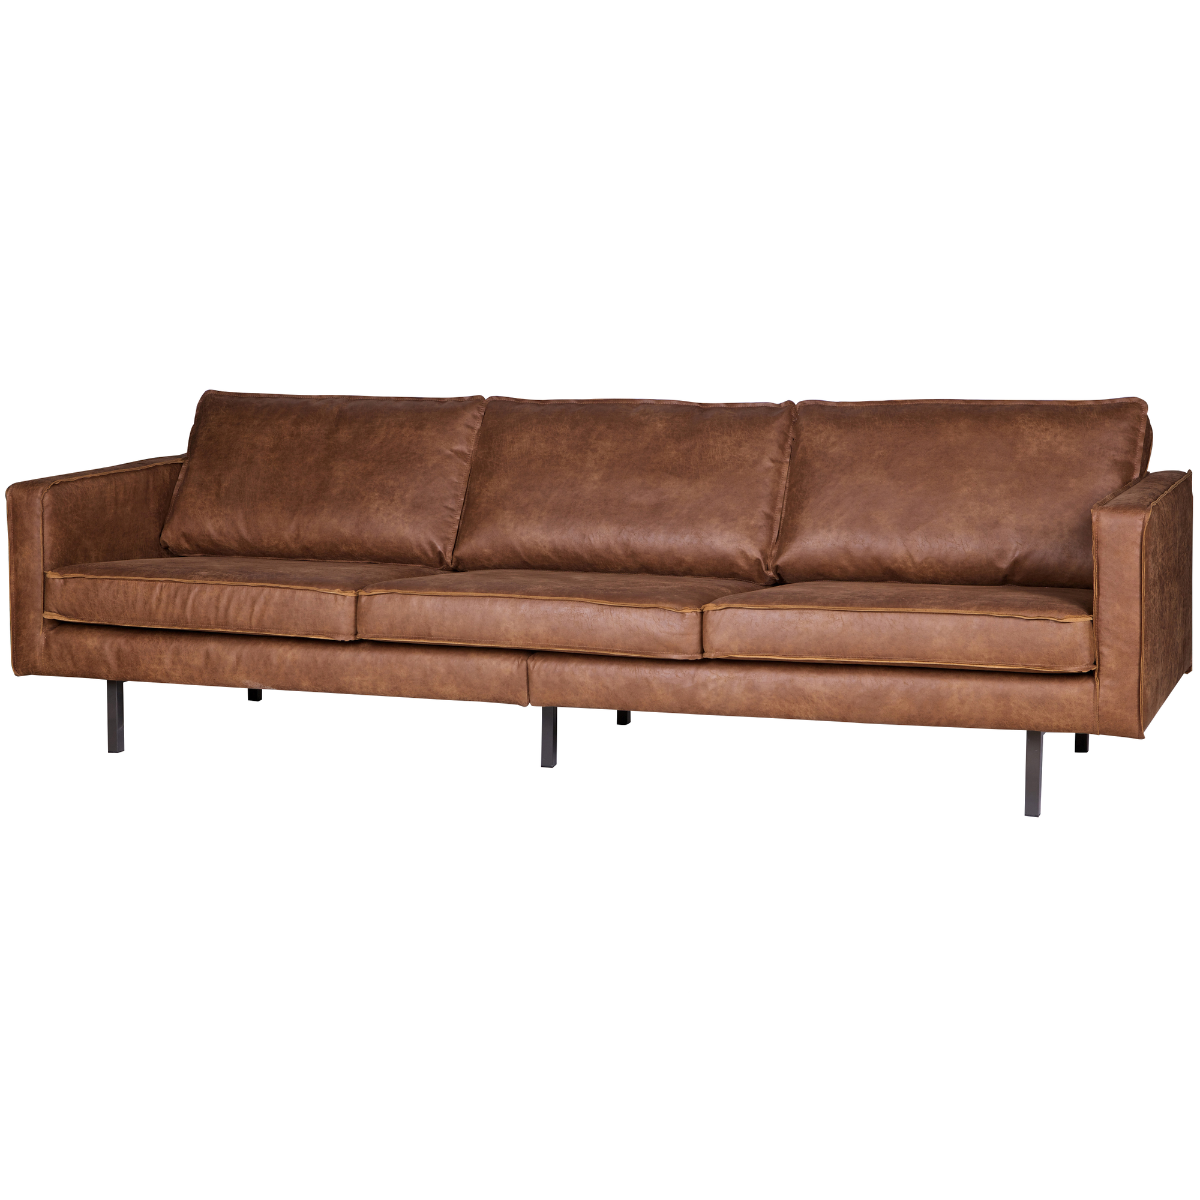 Rodeo Leather 3 Seater Sofa